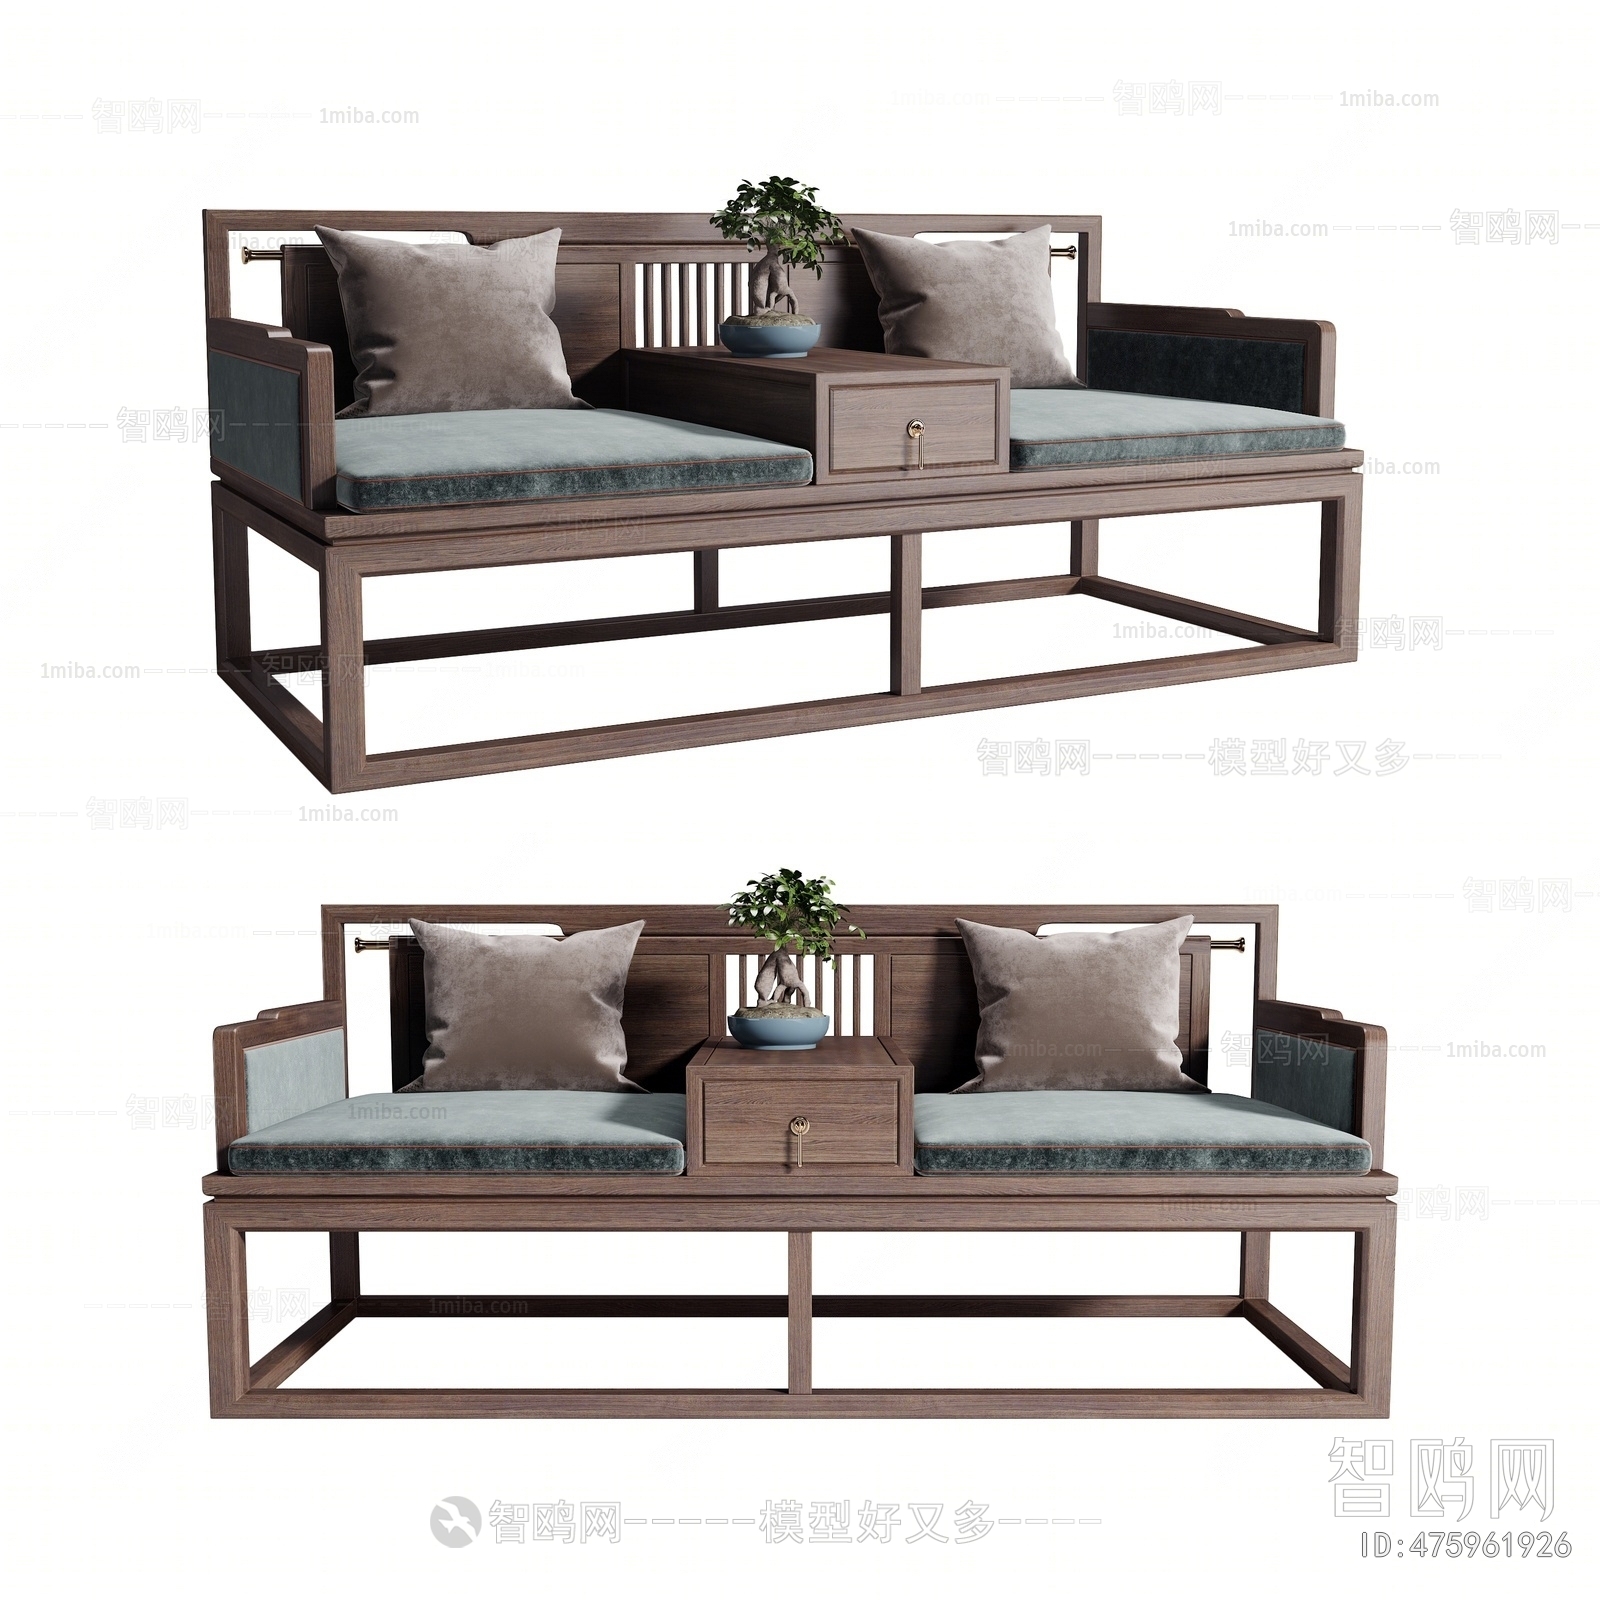 New Chinese Style Arhat Bed